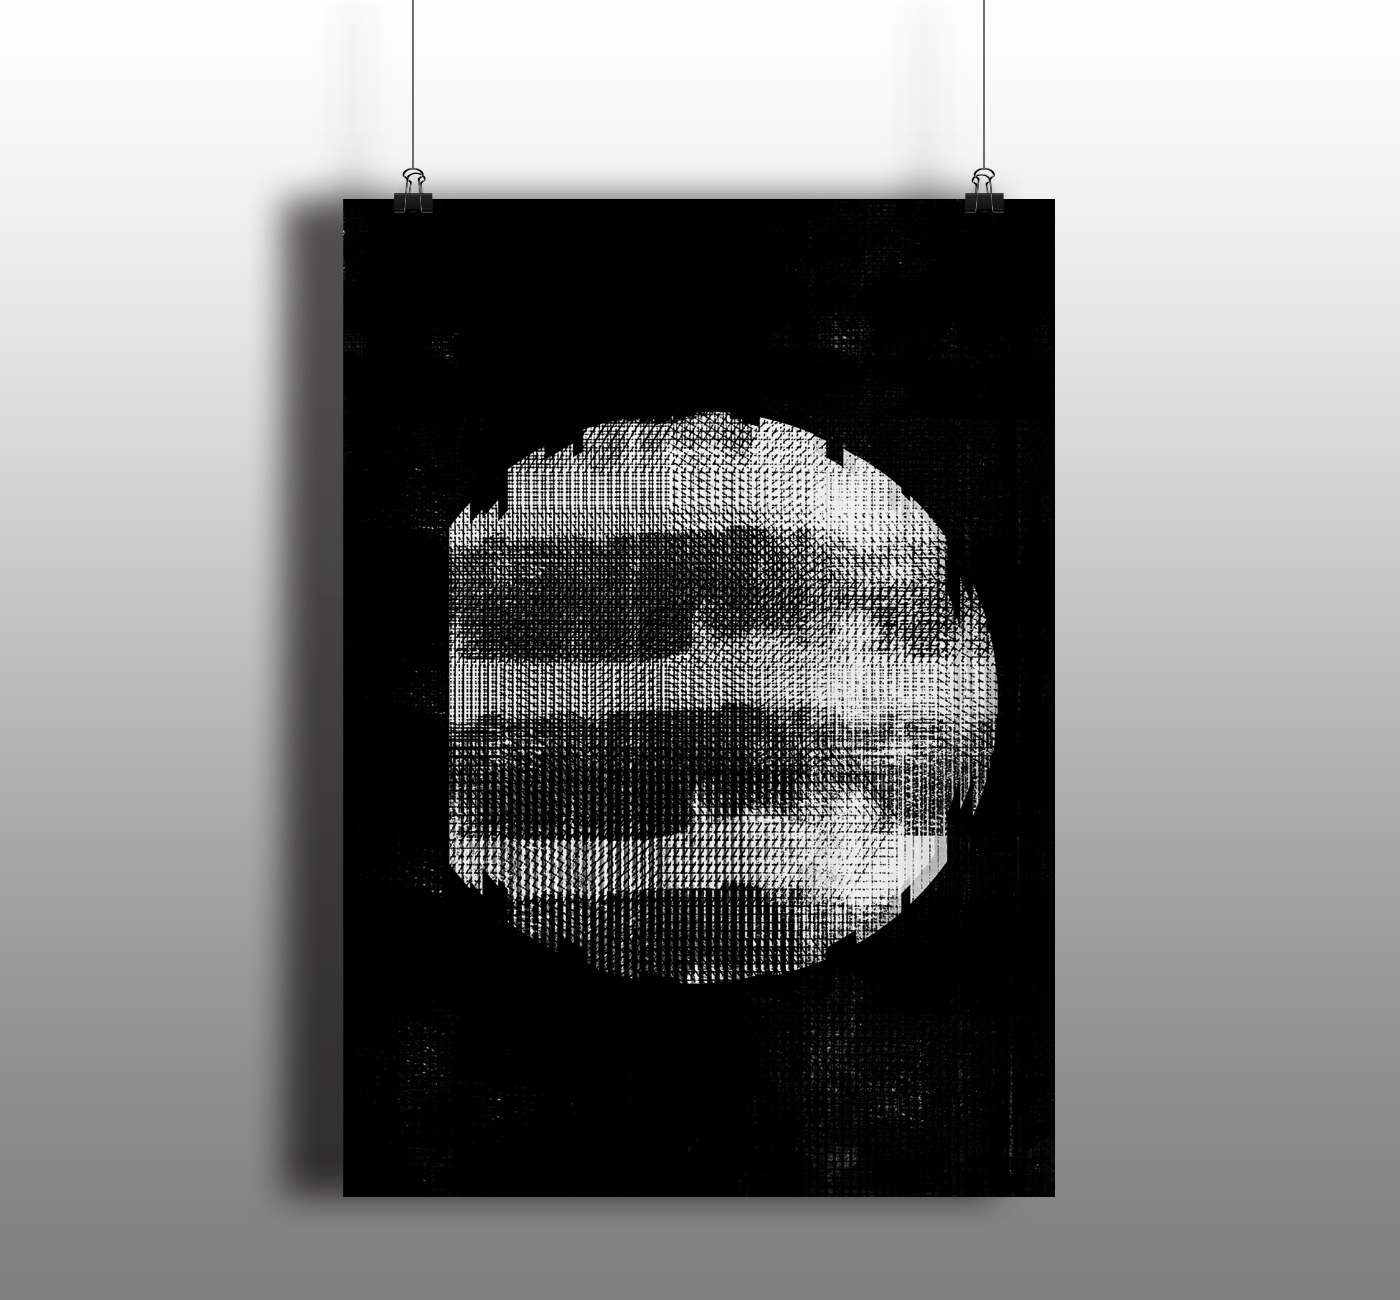 Space  abstract moon Morphology poster affiche afiche print print design  cartel